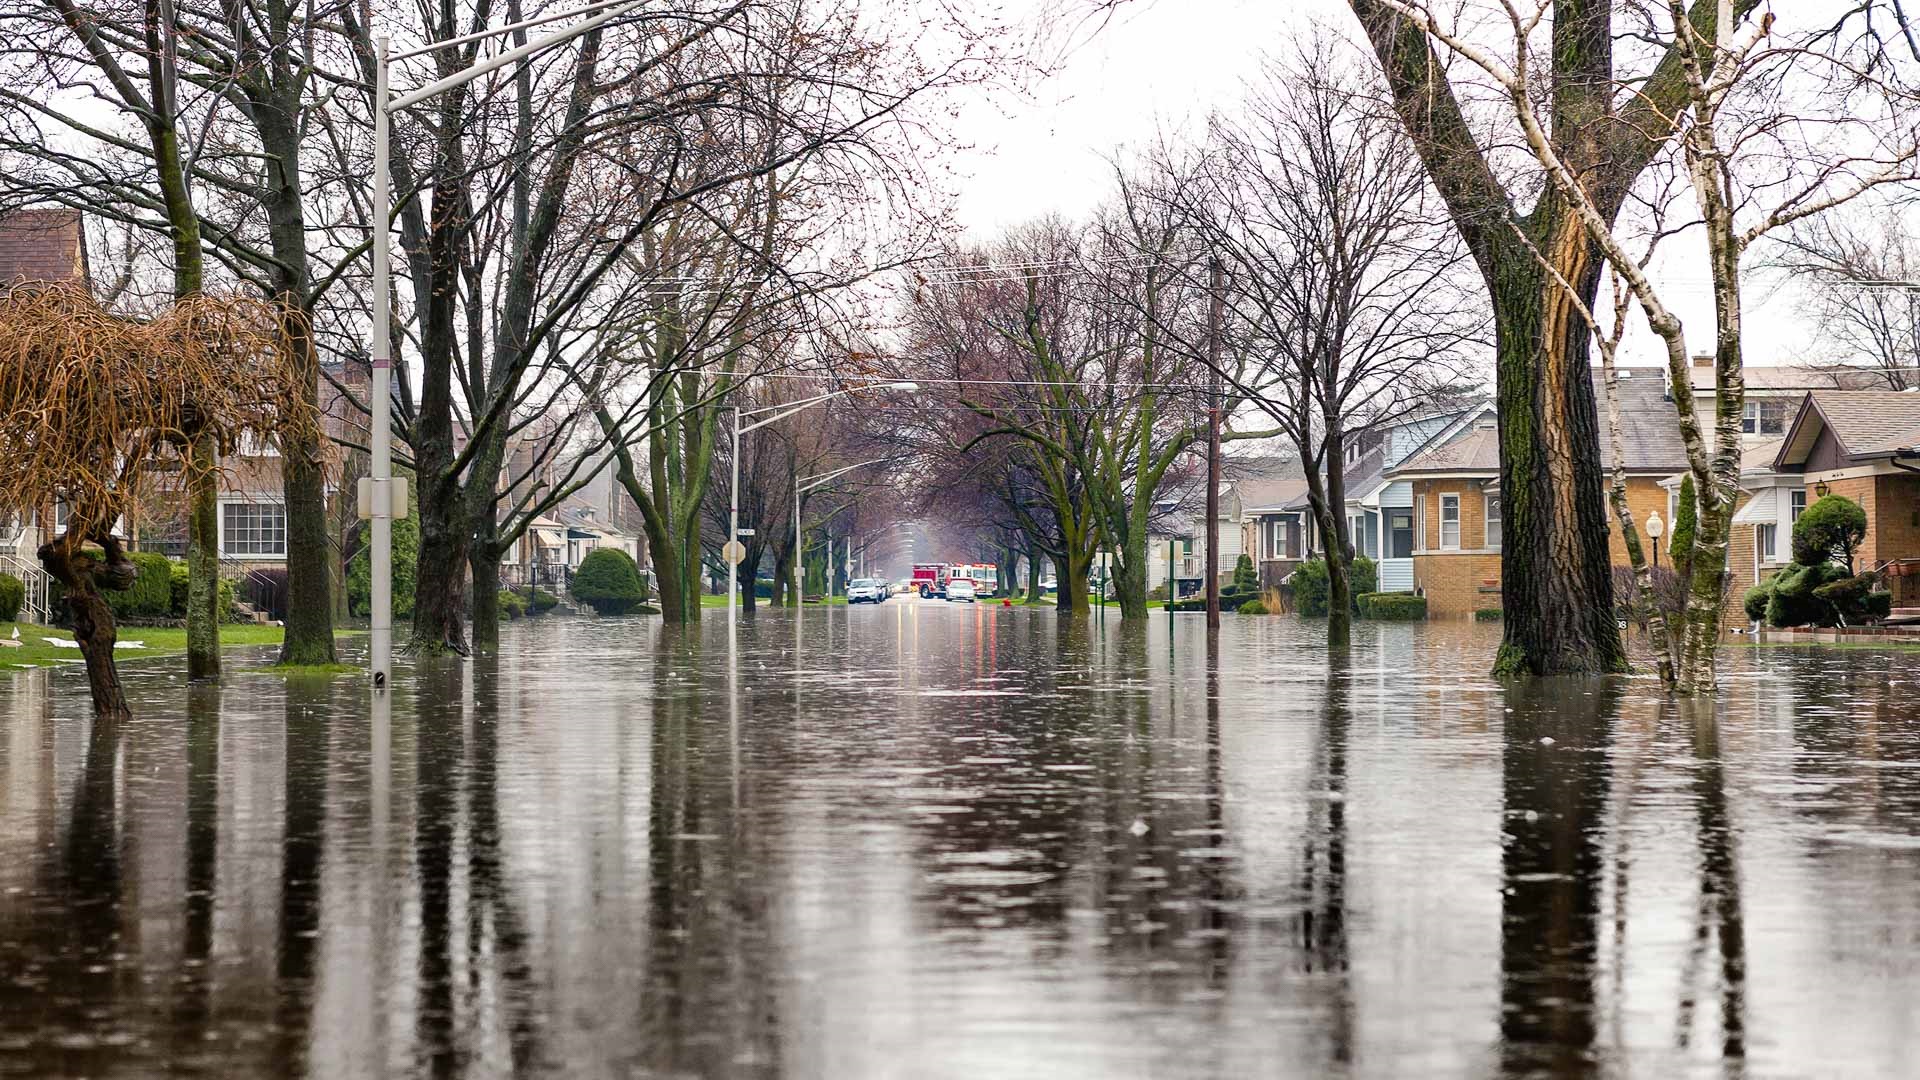 First of its kind dataset shows future flooding risk at neighborhood level